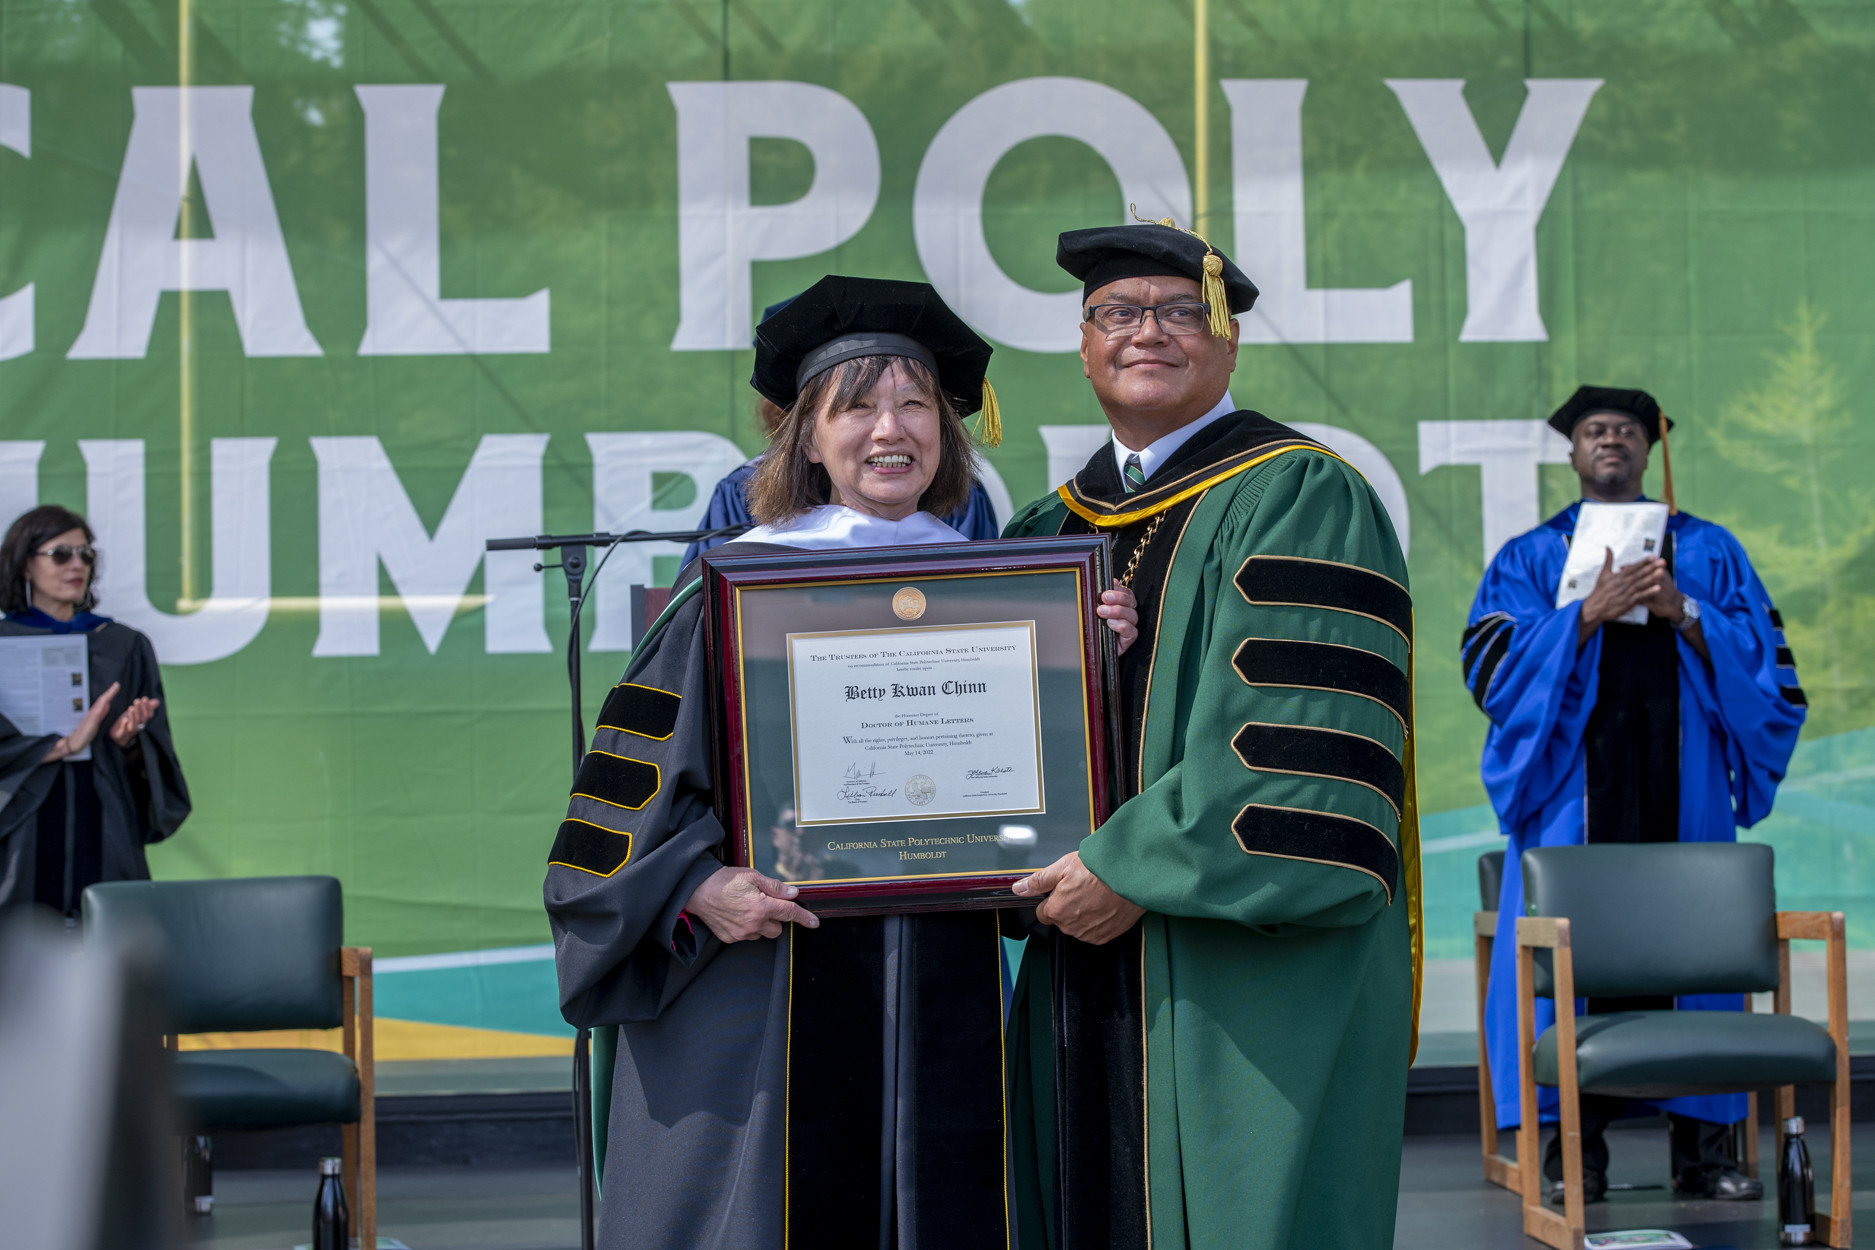 Betty Kwan Chinn receiving an honorary degree presented by Cal Poly Humboldt President Tom Jackson, Jr.